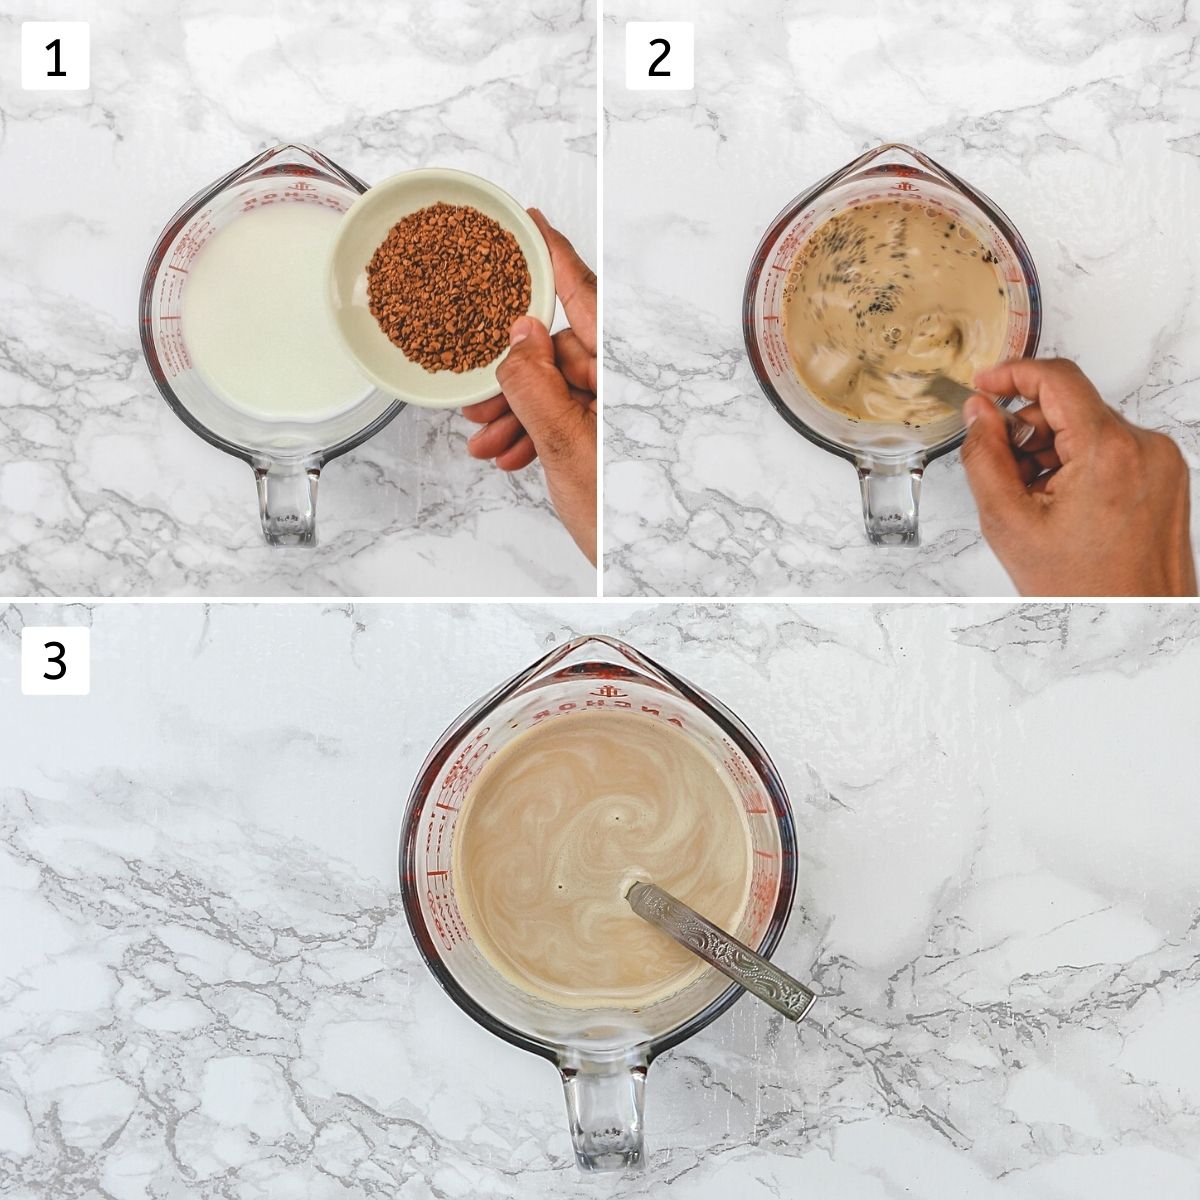 Collage of 3 steps showing adding coffe granules in milk, and mixing.